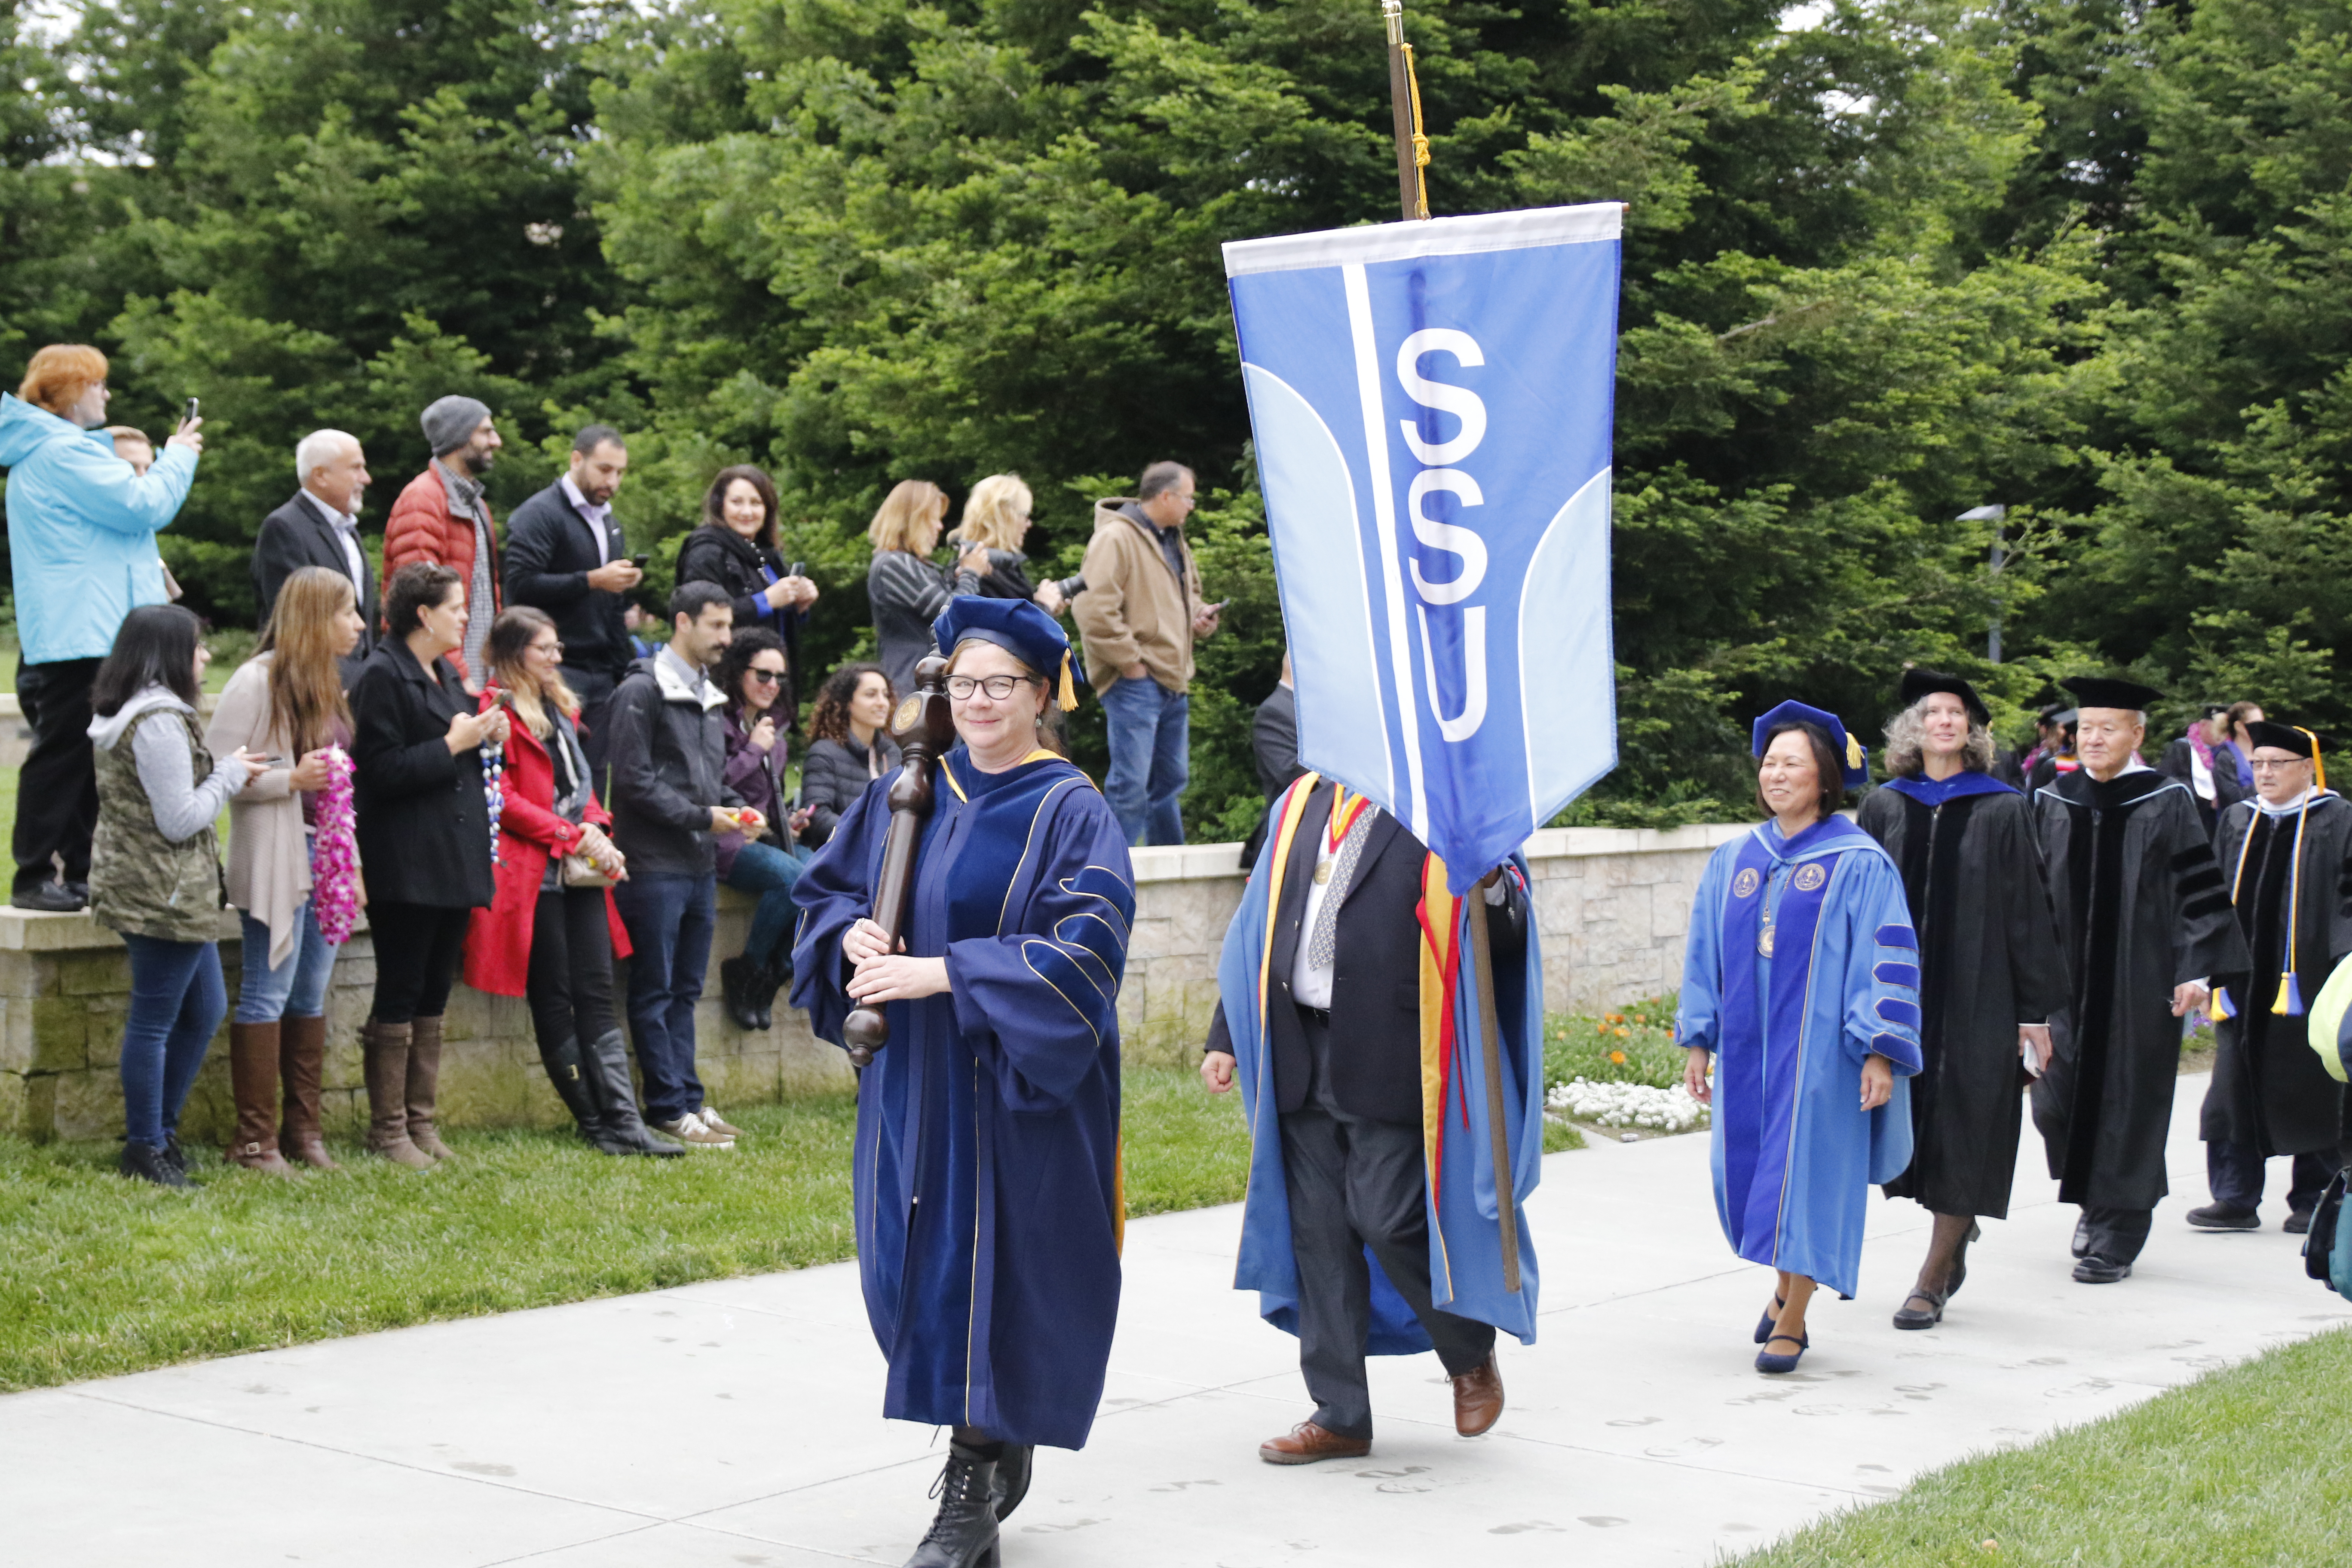 Processional of faculty with SSU banner at commencement